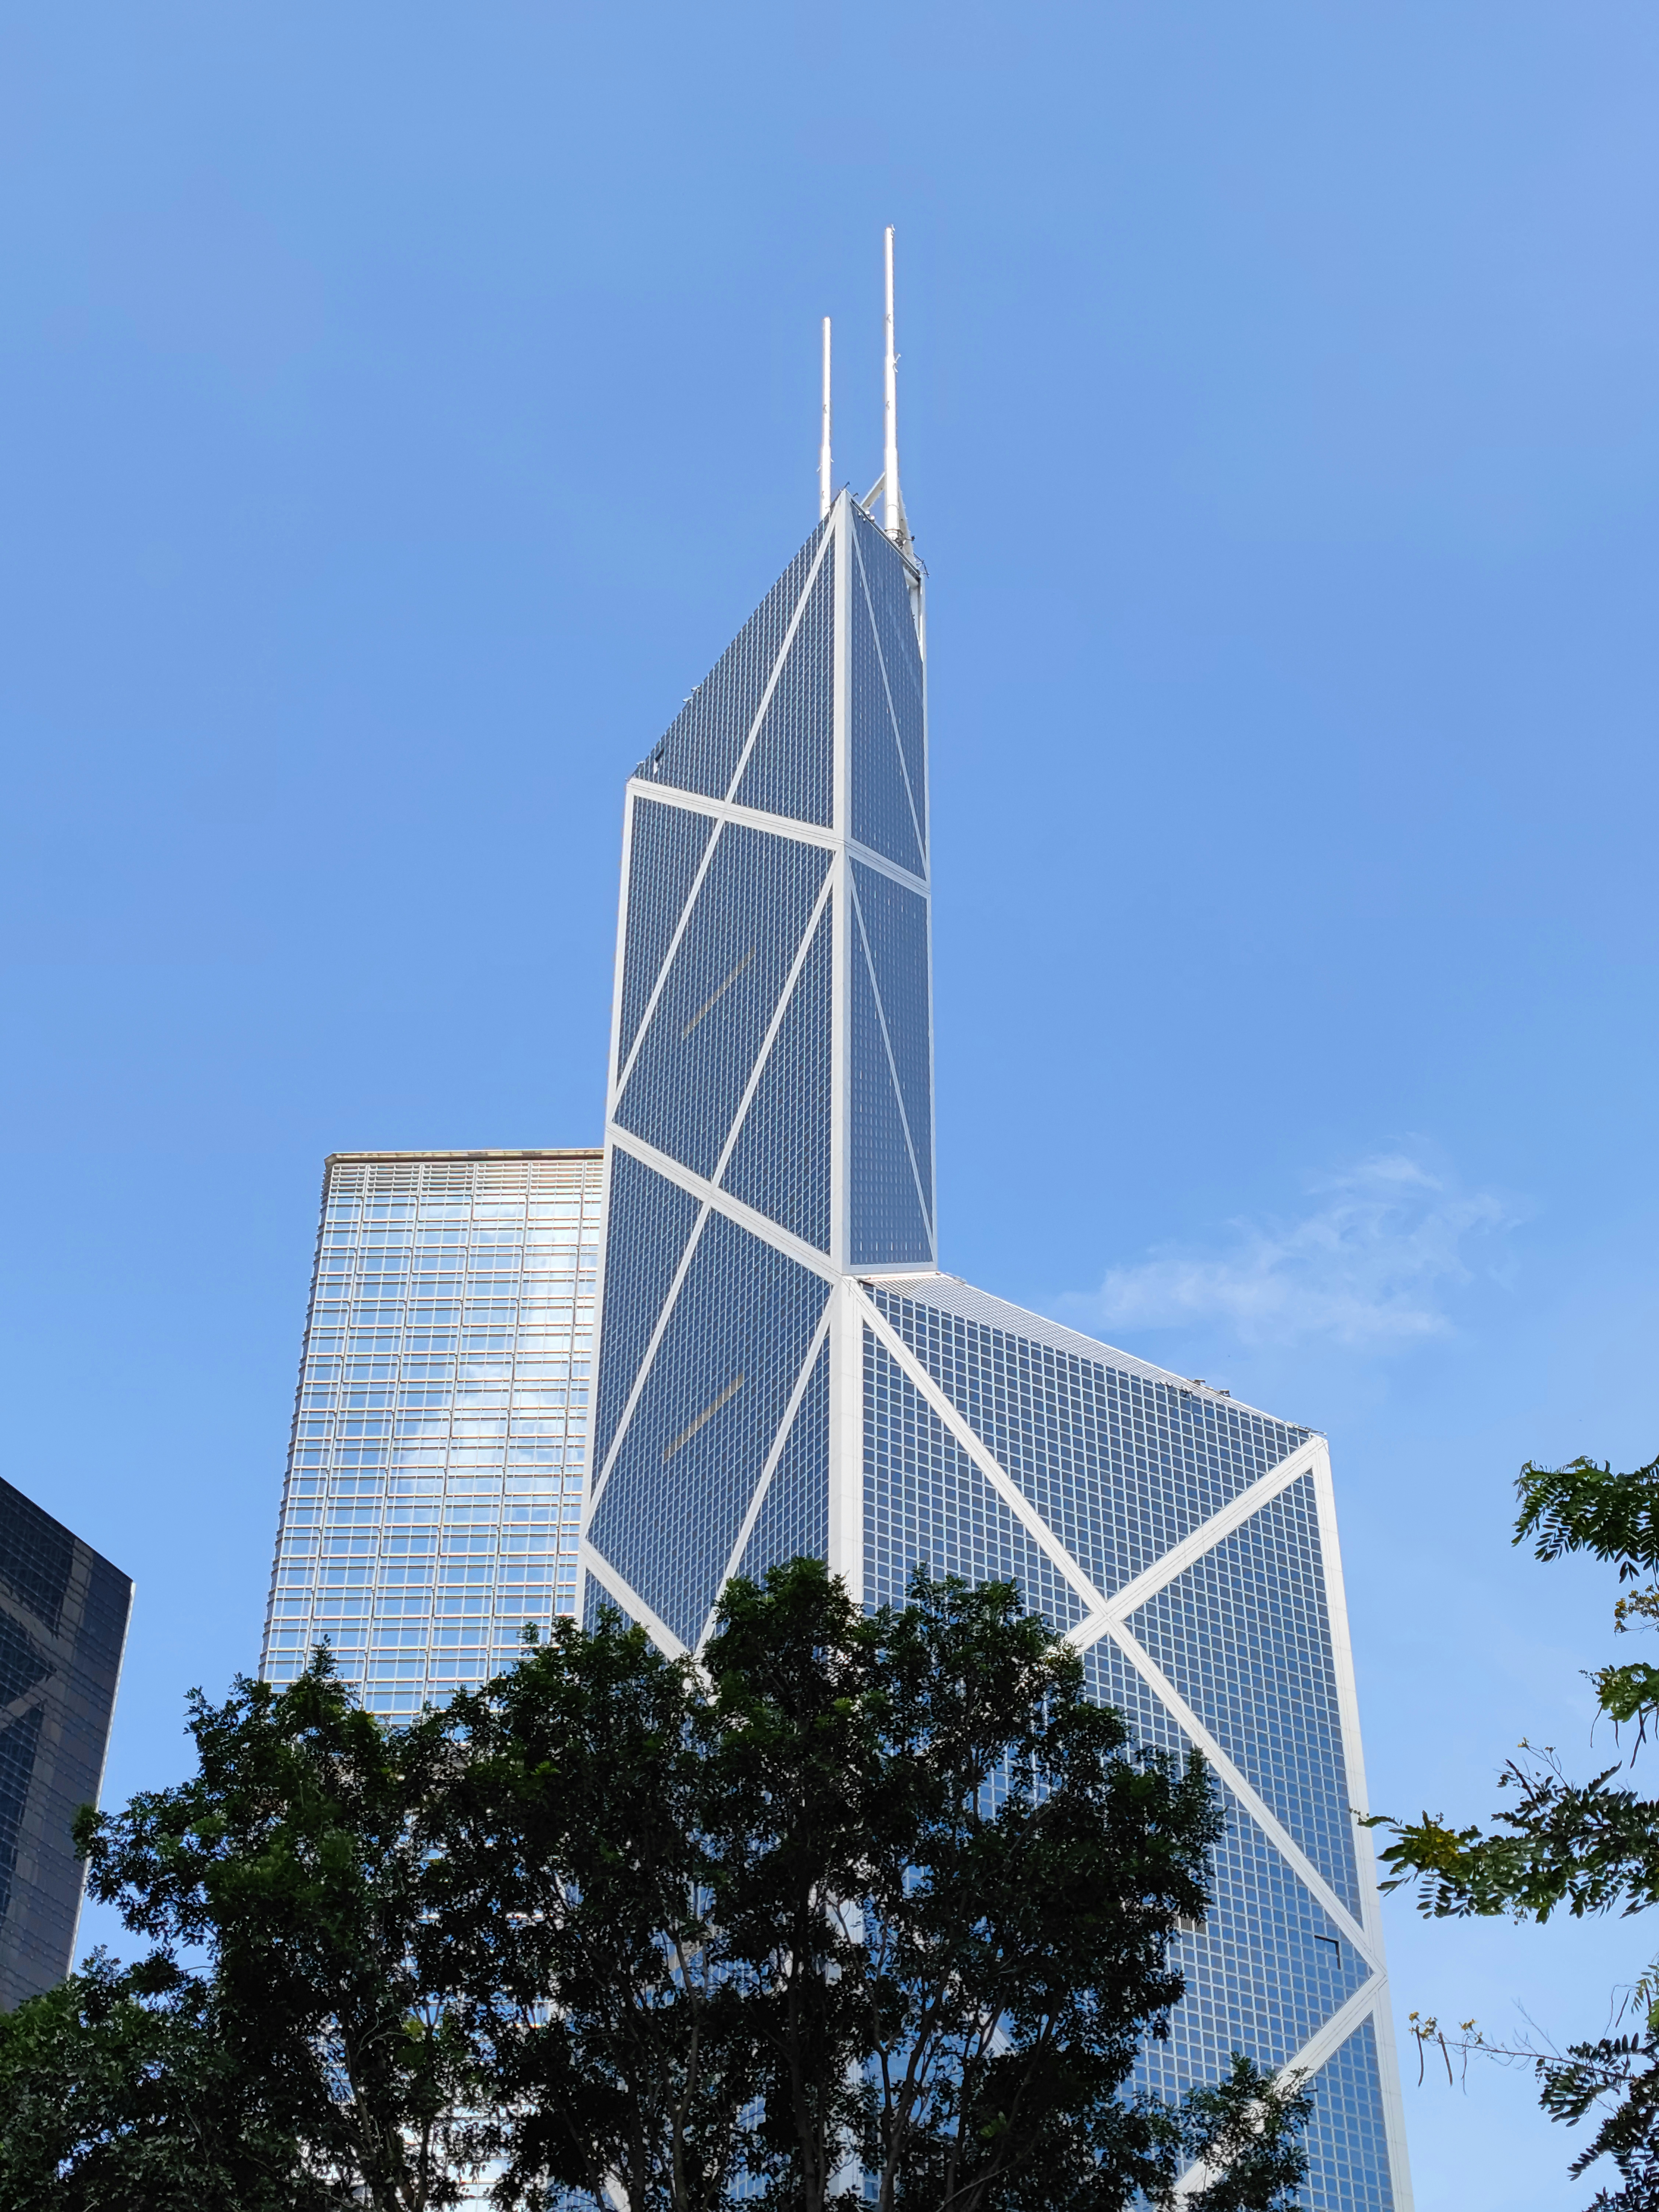 The iconic Bank of China Tower in Central District, Hong Kong, designed by the renowned Chinese architect Ieoh Ming Pei (貝聿銘). The design of this building resembles the structure of a bamboo tree. Pei was also the architect who built The Louvre Pyramid (i.e. entrance) of the Louvre Museum in Paris. The photo was taken at the entrance of Hong Kong Park.